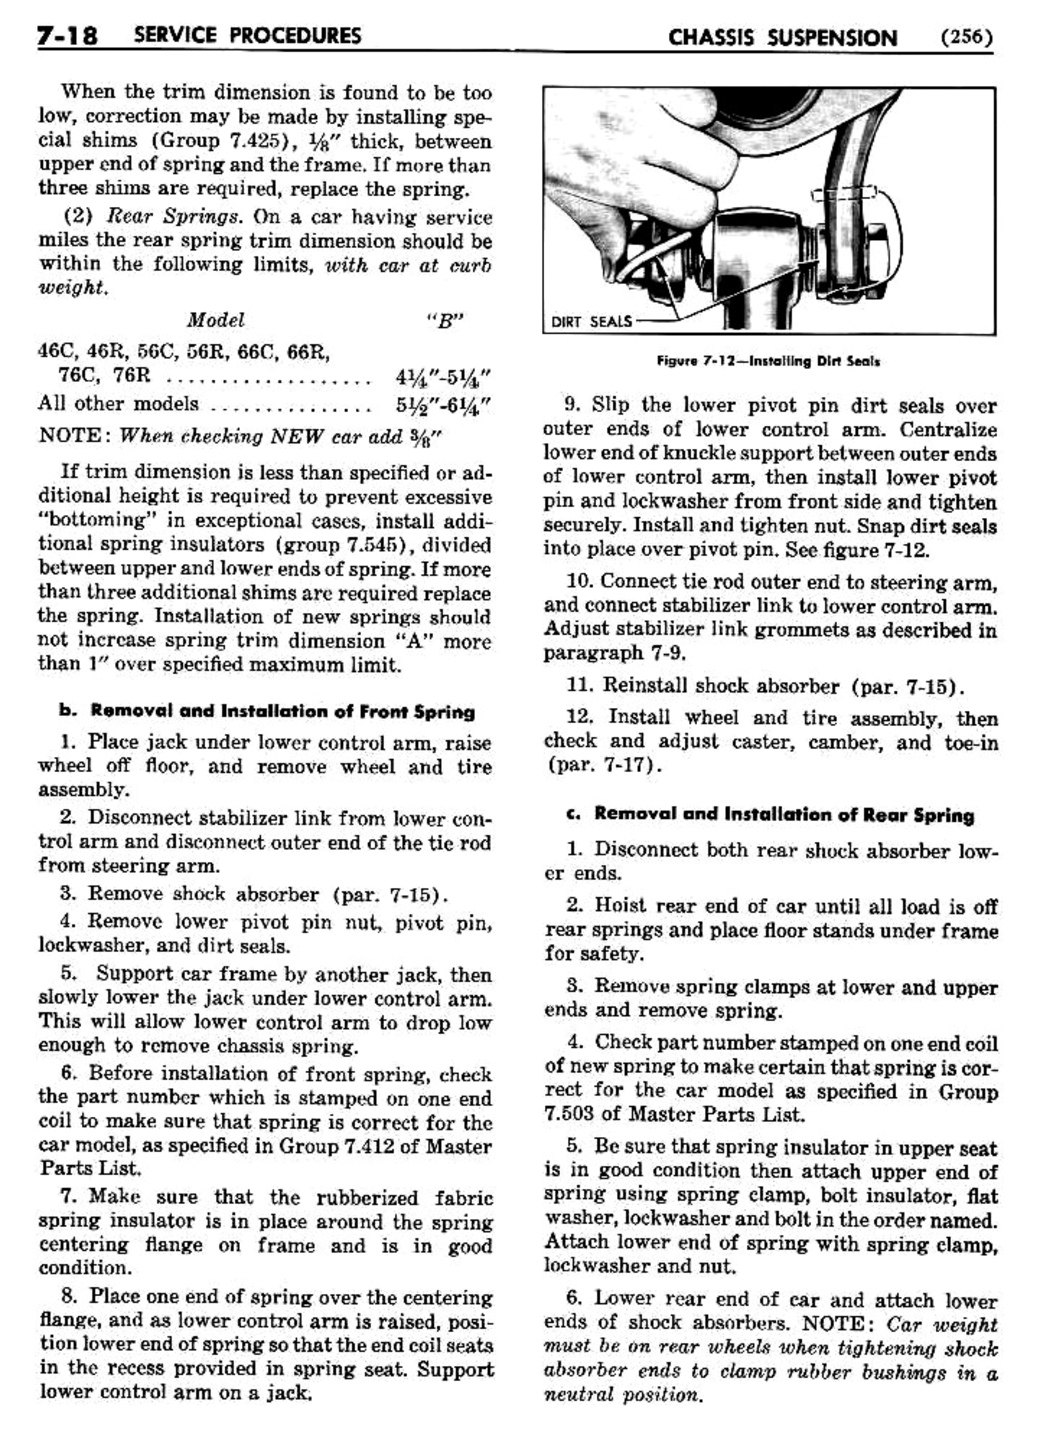 n_08 1956 Buick Shop Manual - Chassis Suspension-018-018.jpg